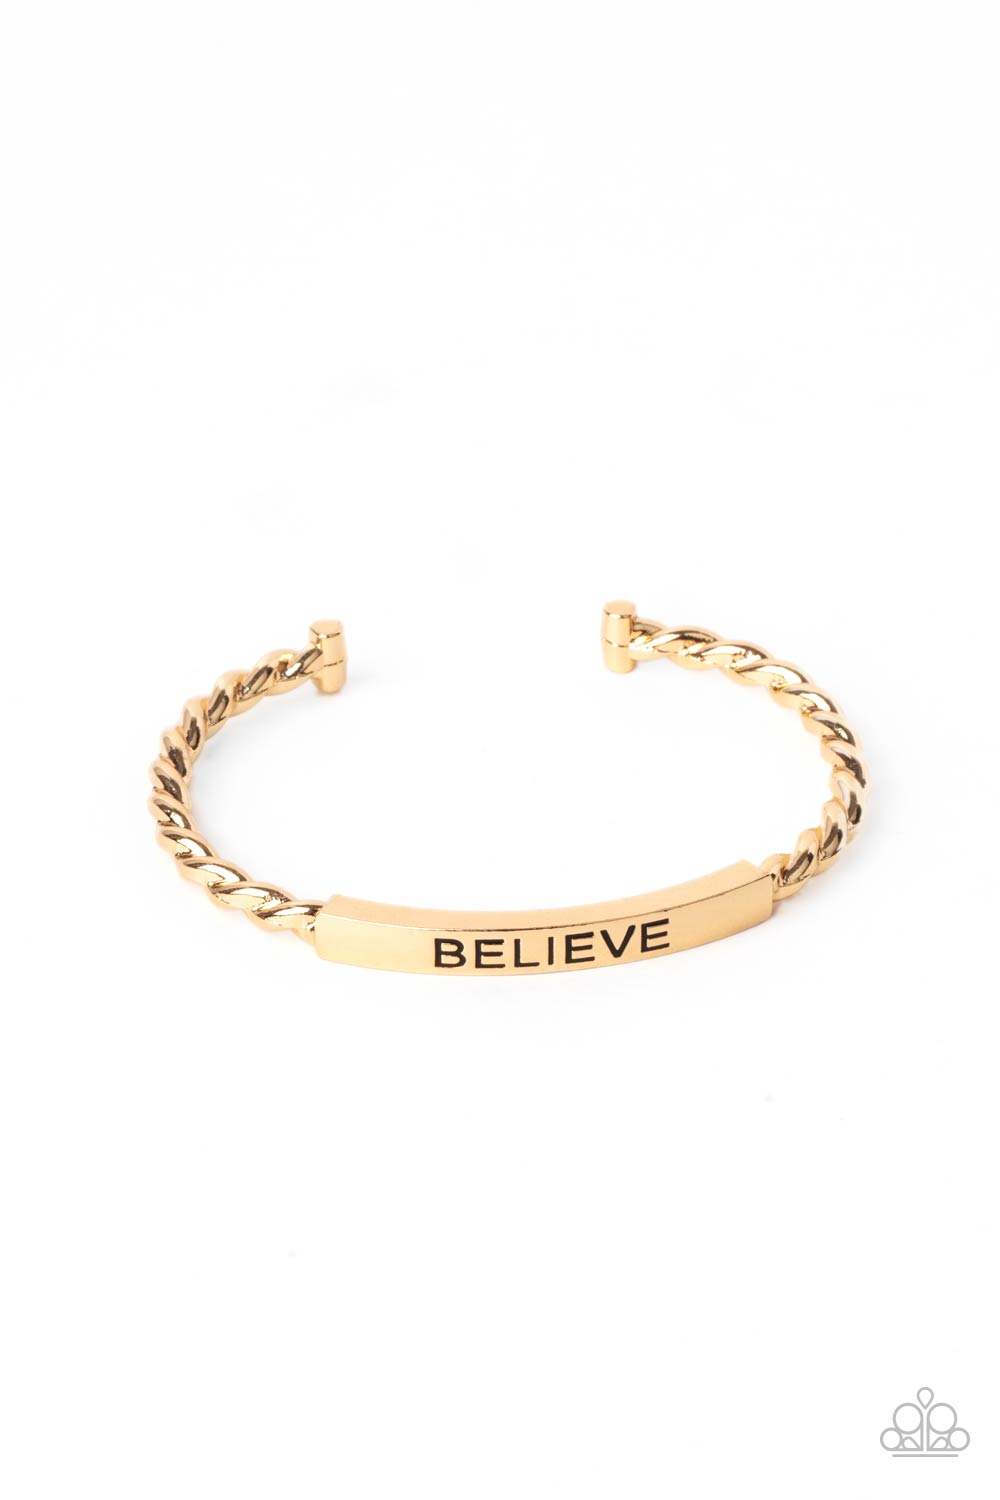 Keep Calm and Believe - Gold 💕0775